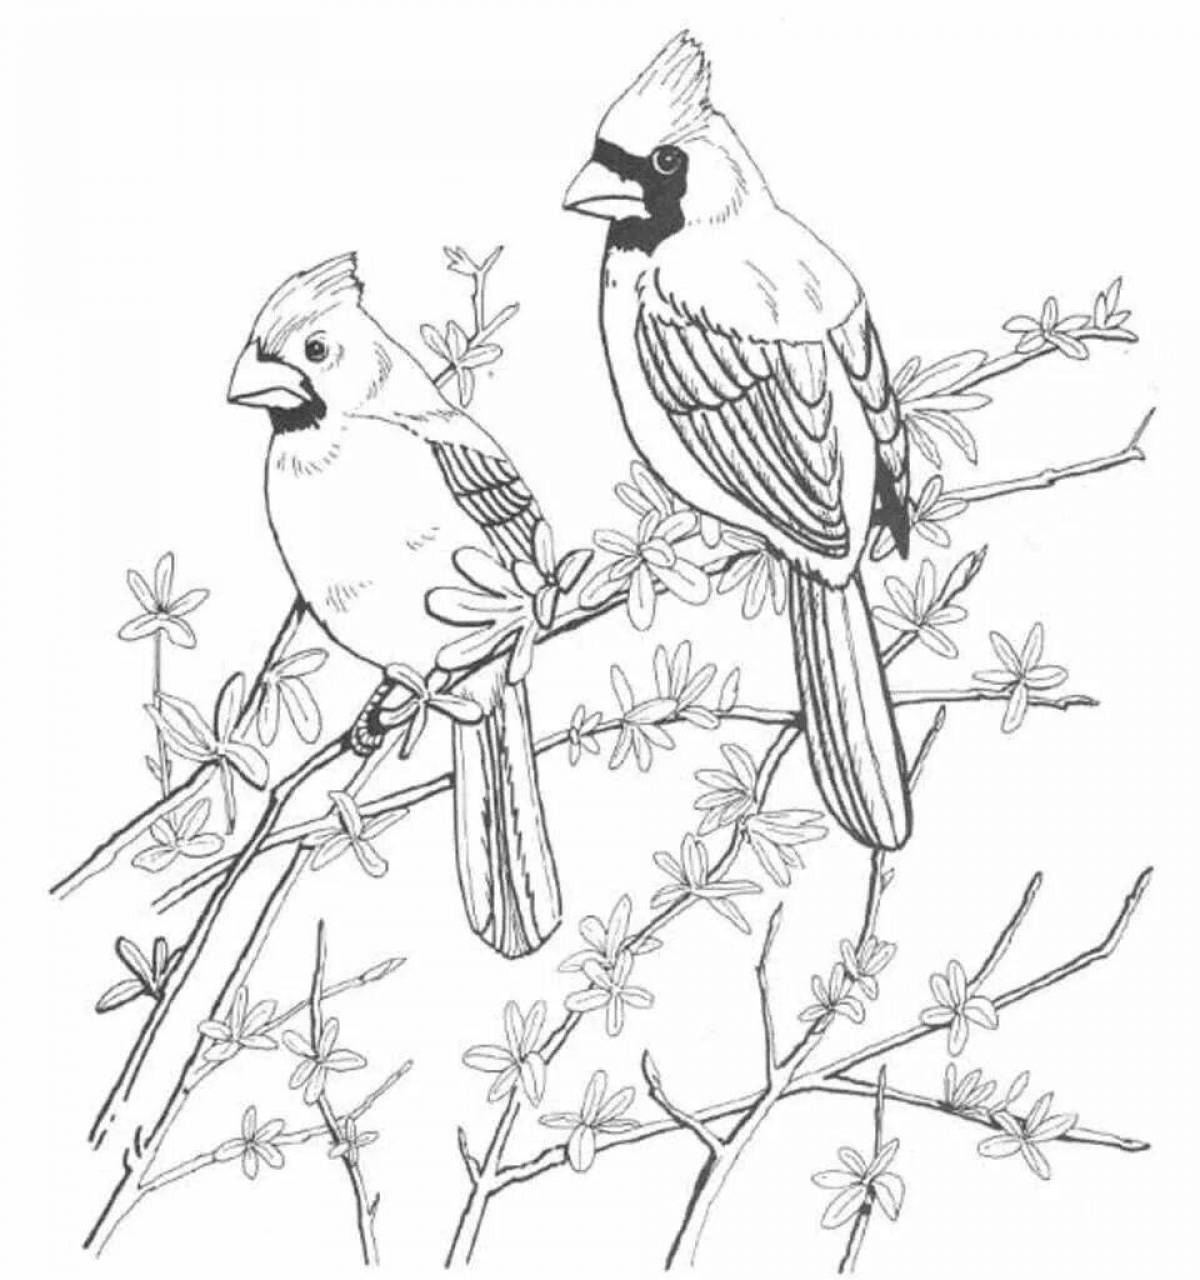 Coloring book luxury waxwing